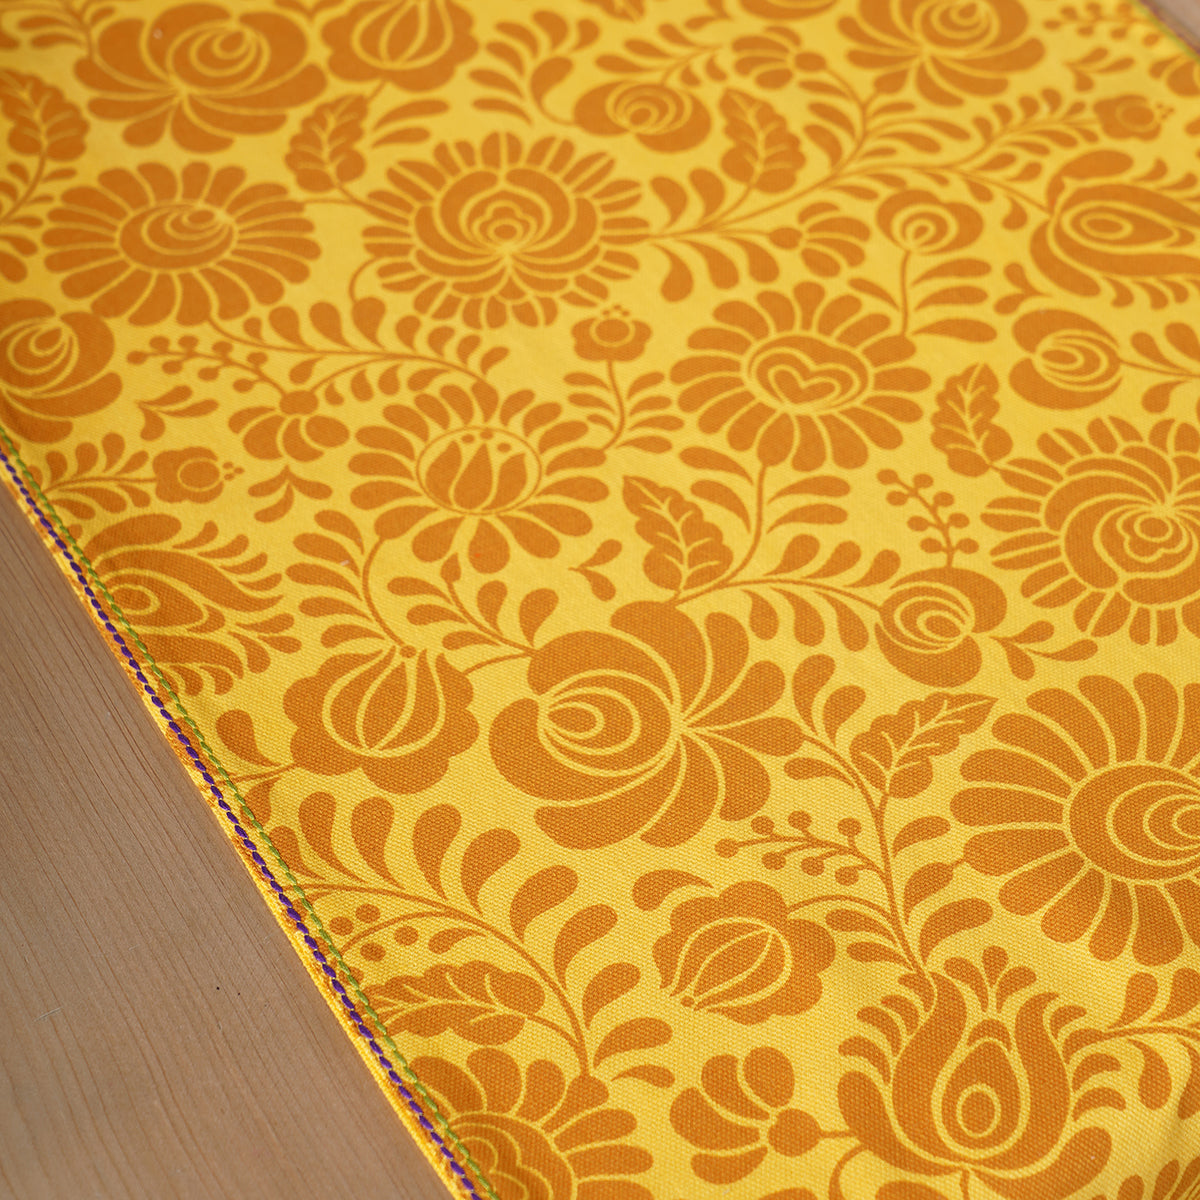 Matyo - Yellow printed cotton Table runner with multicolour acrylic fringe, sizes available